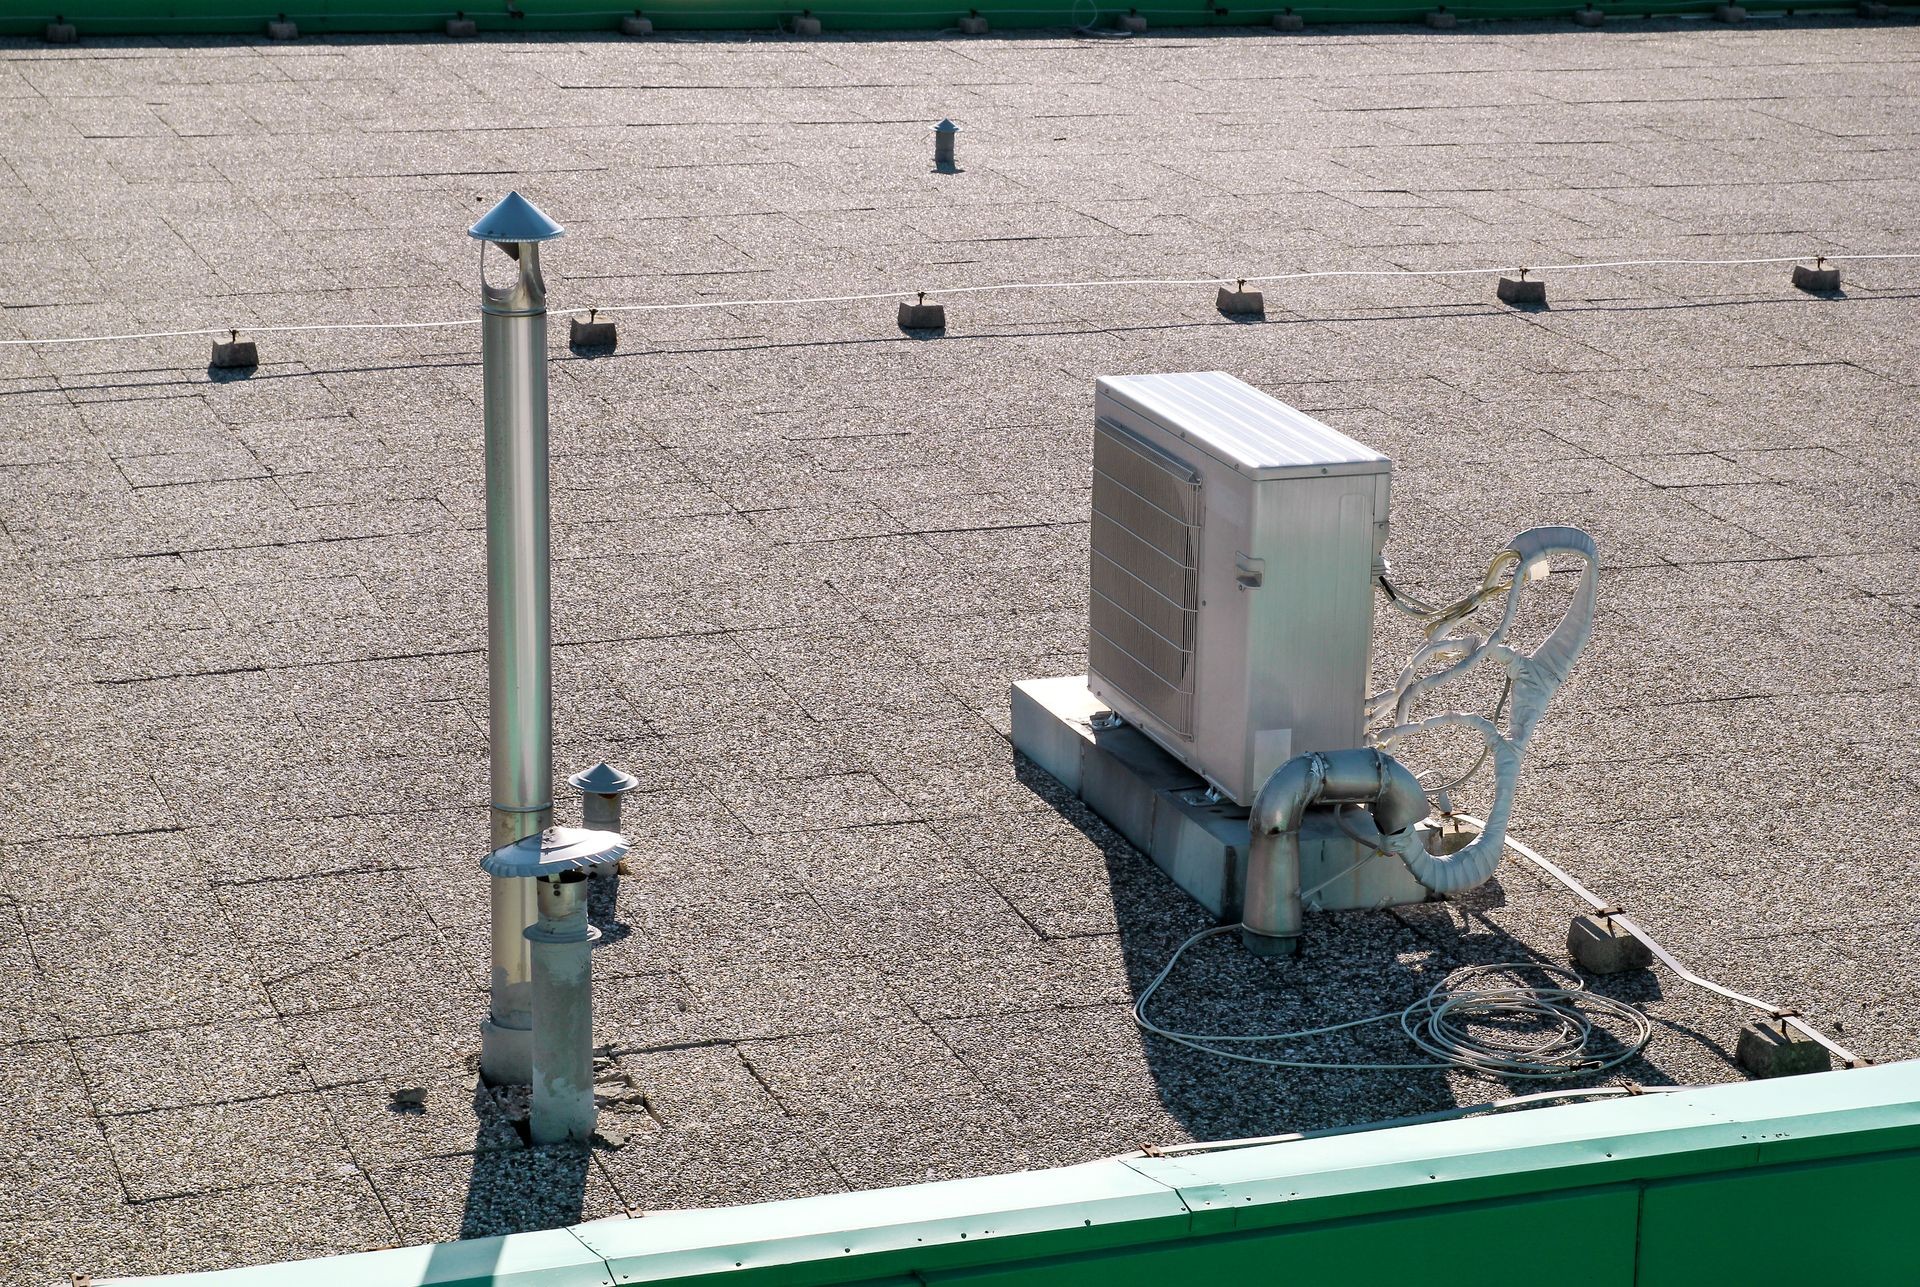 Air conditioning system assembled on top of a building / Air vents on top of commercial building / Air cooled water chillers top of roof / Outdoor climate unit and cooling and heating systems.